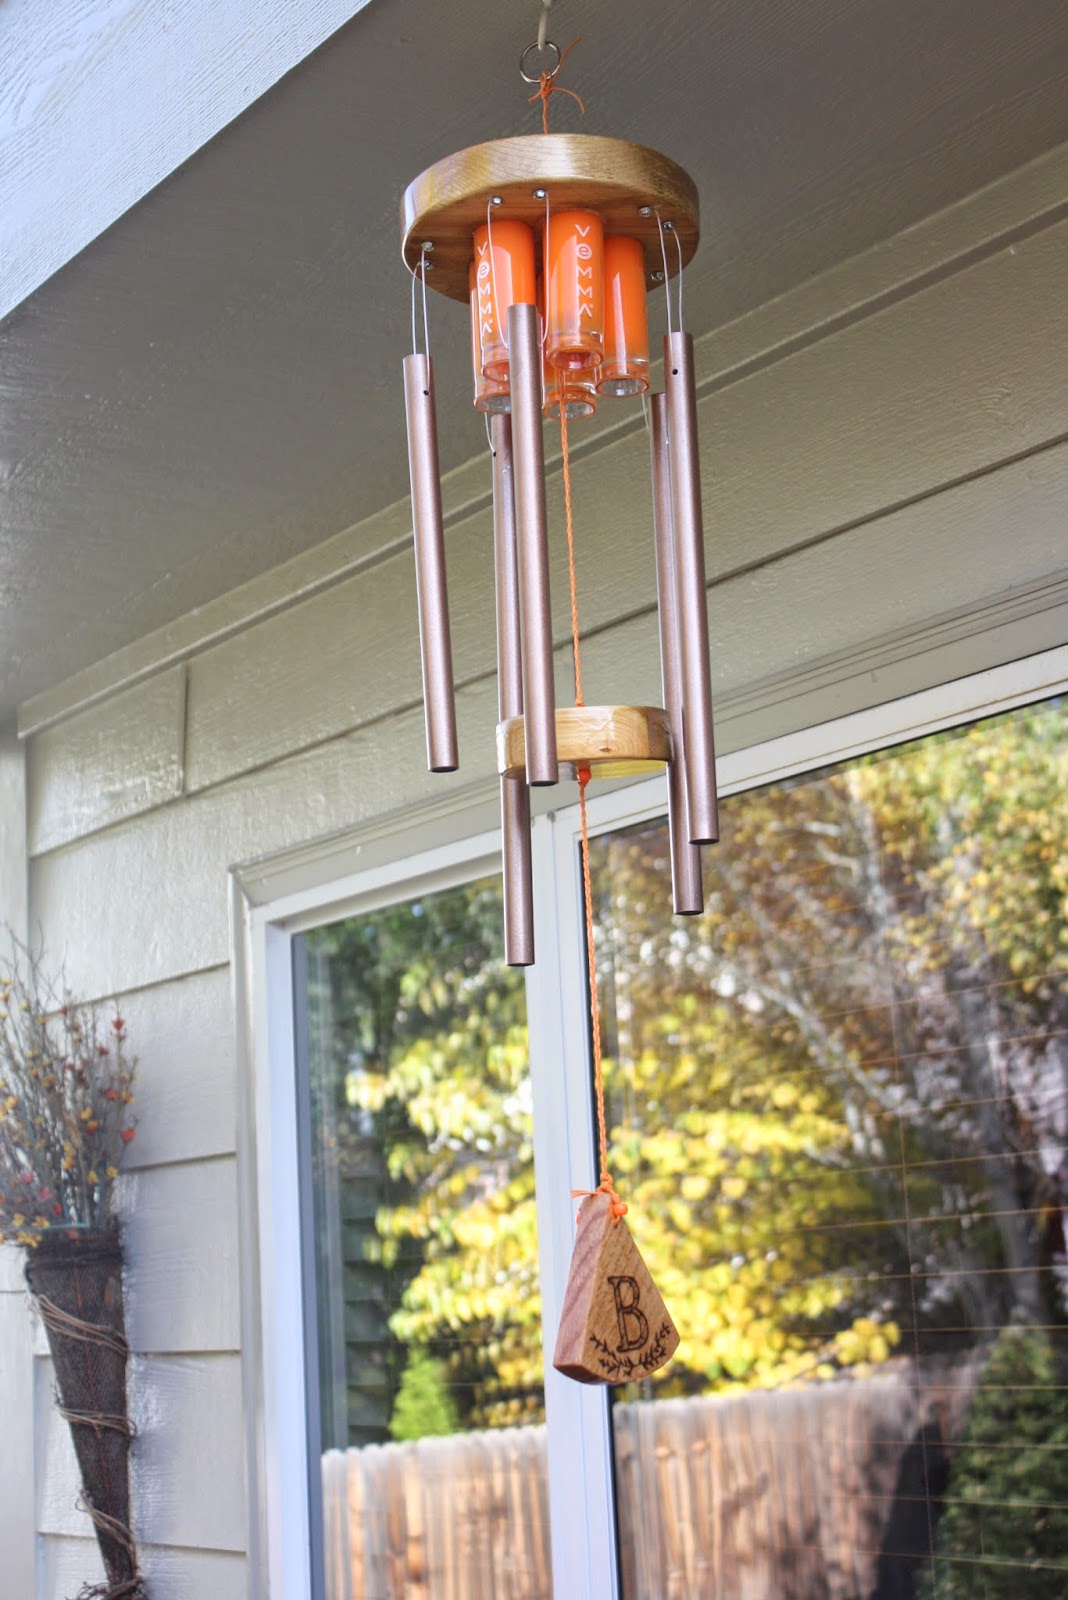 His, Hers and Ours DIY: DIY WIND CHIME